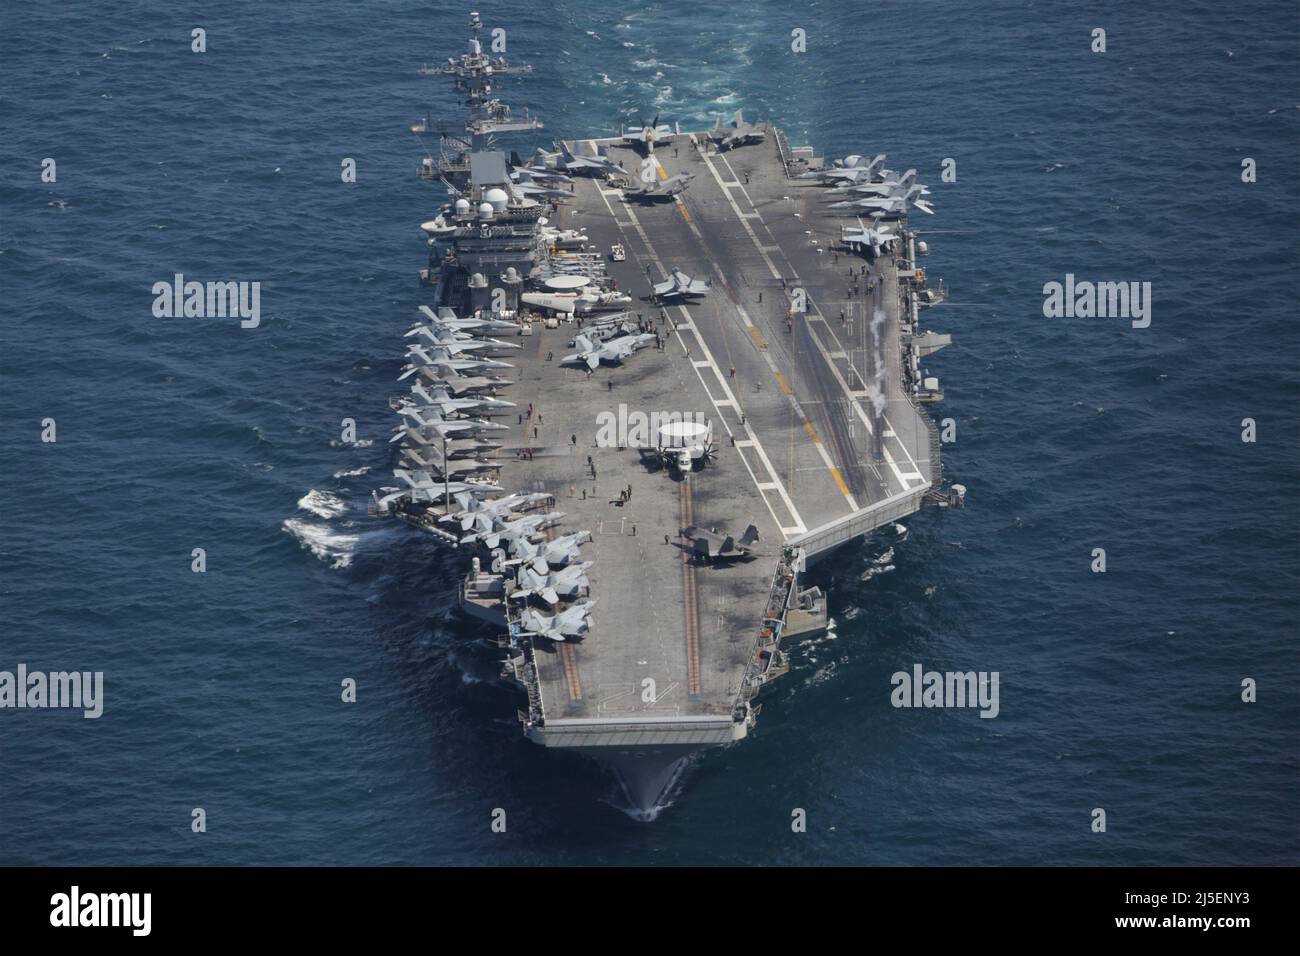 USS Abraham Lincoln, Japan. 13 April, 2022. The U.S. Navy Nimitz-class aircraft carrier USS Abraham Lincoln, sails in formation during a U.S.-Japan bilateral exercise, April 13, 2022 in the Atlantic Ocean.  Credit: MCS Aleksandr Freutel/Planetpix/Alamy Live News Stock Photo